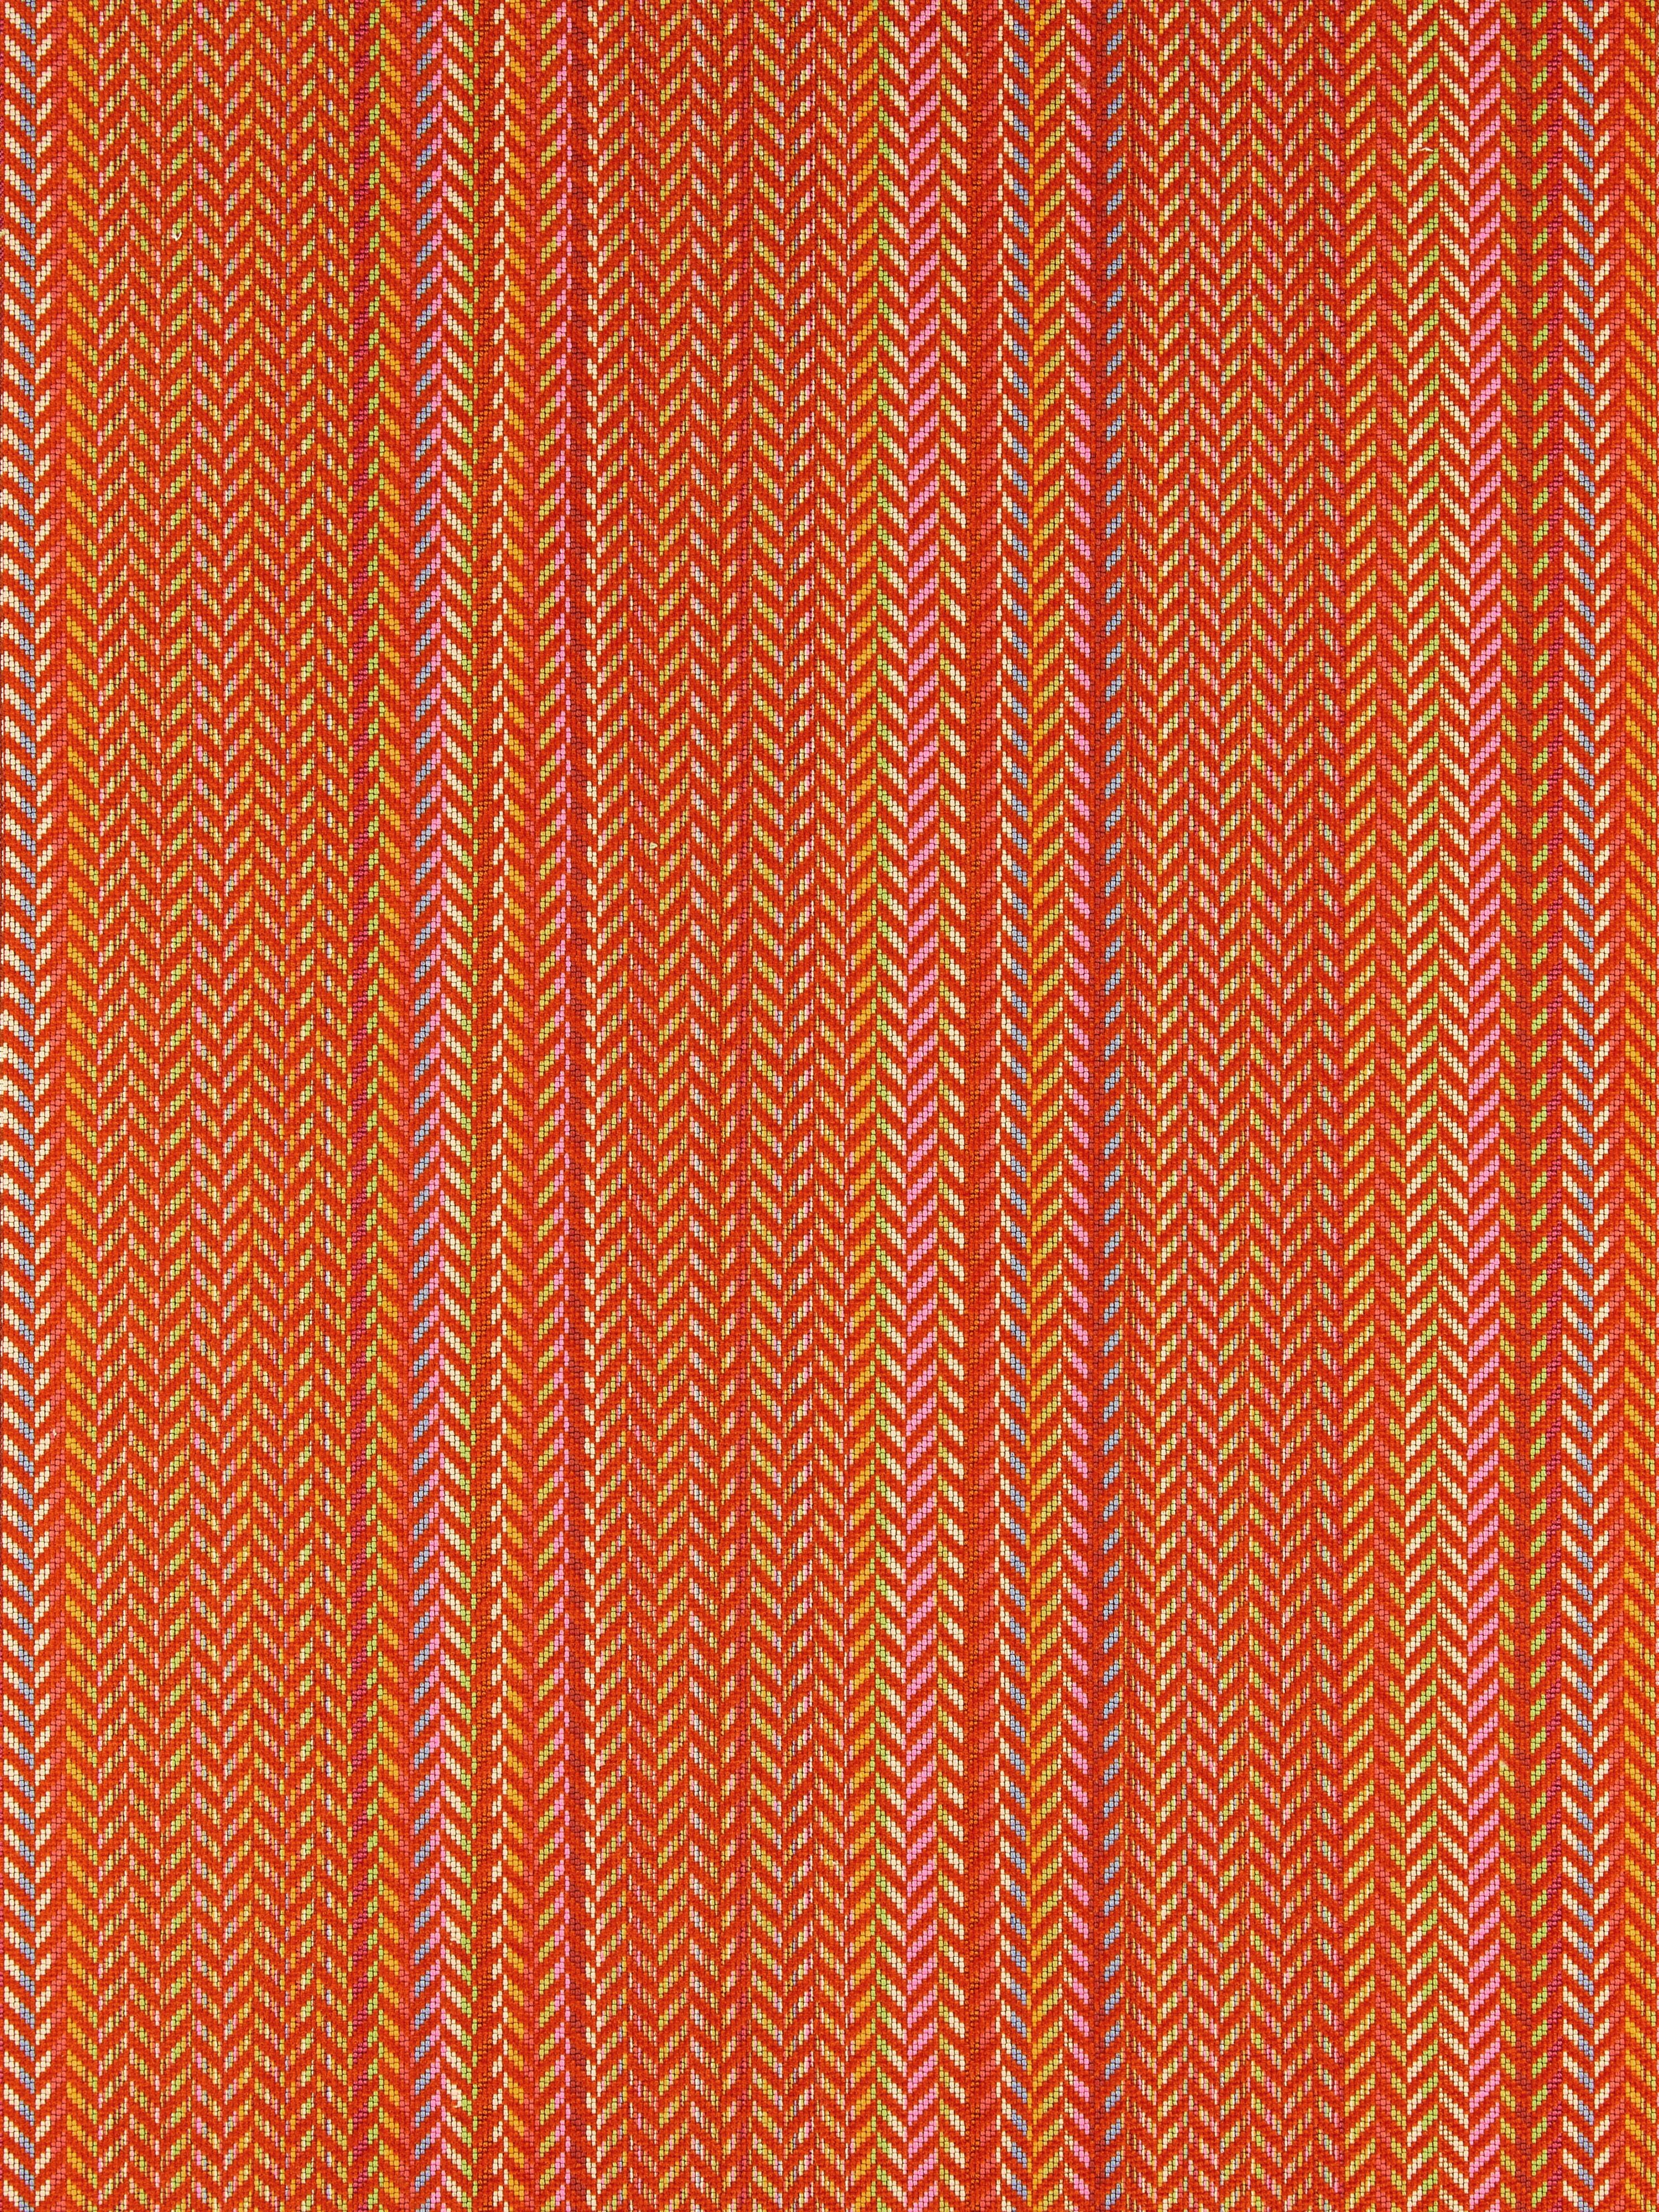 Arrow Stripe fabric in calypso color - pattern number SC 000327254 - by Scalamandre in the Scalamandre Fabrics Book 1 collection